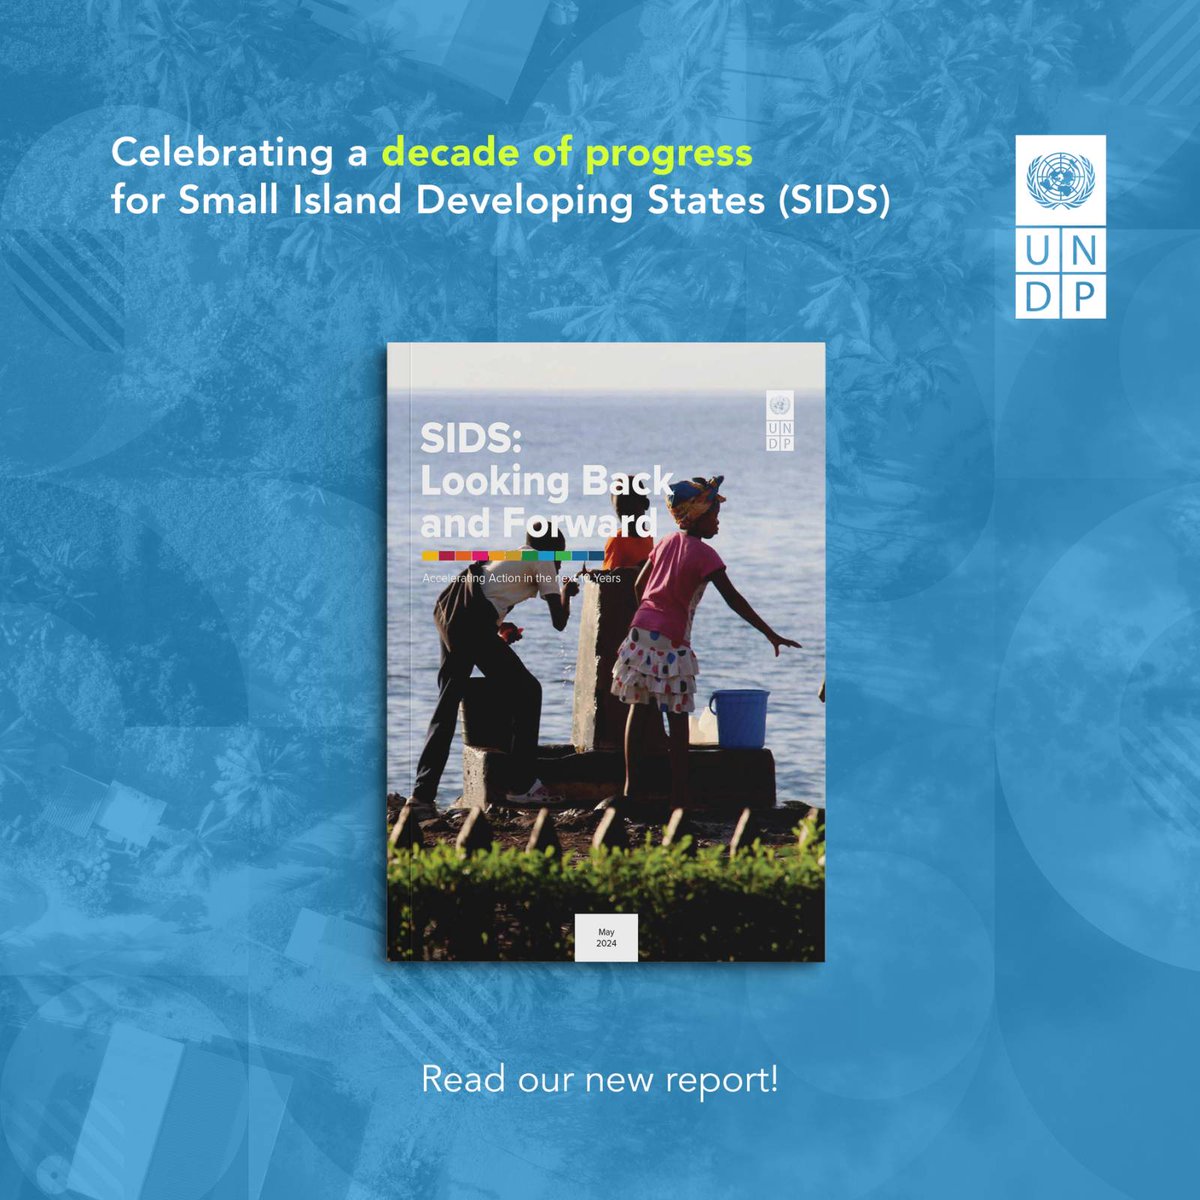 🚀 Celebrating a decade of progress for Small Island Developing States (#SIDS) with UNDP's new report! From climate action to digital transformation, explore our strategic roadmap for the next 10 years.
🌟 Read 'SIDS: Looking Back and Forward' here: undp.org/publications/s… #SIDS4